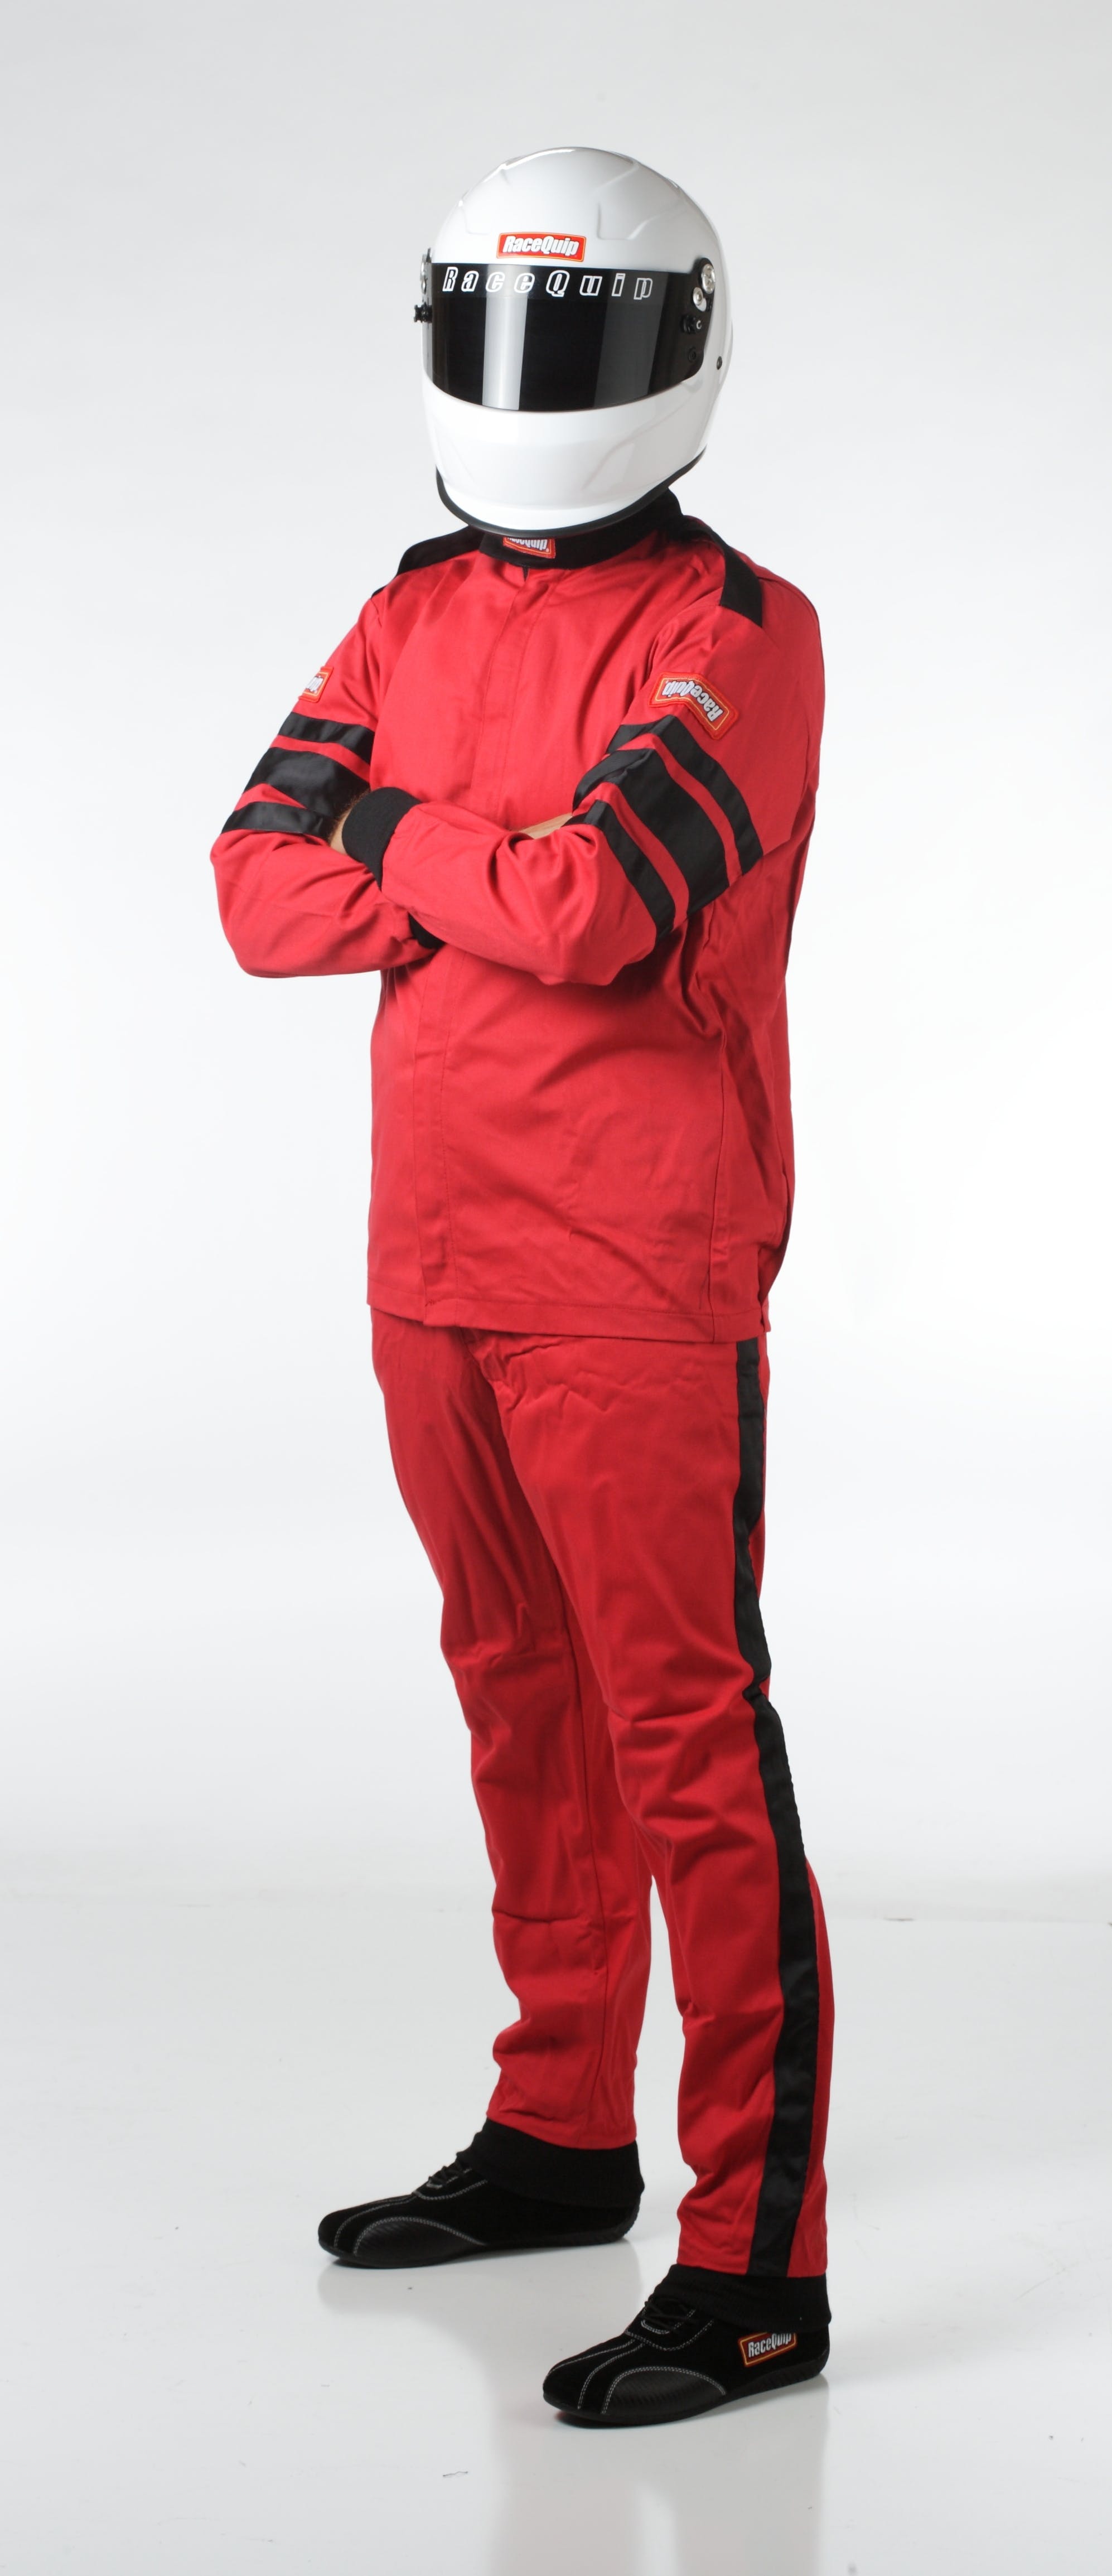 RaceQuip 111016 SFI-1 Pyrovatex Single-Layer Racing Fire Jacket (Red, X-Large)